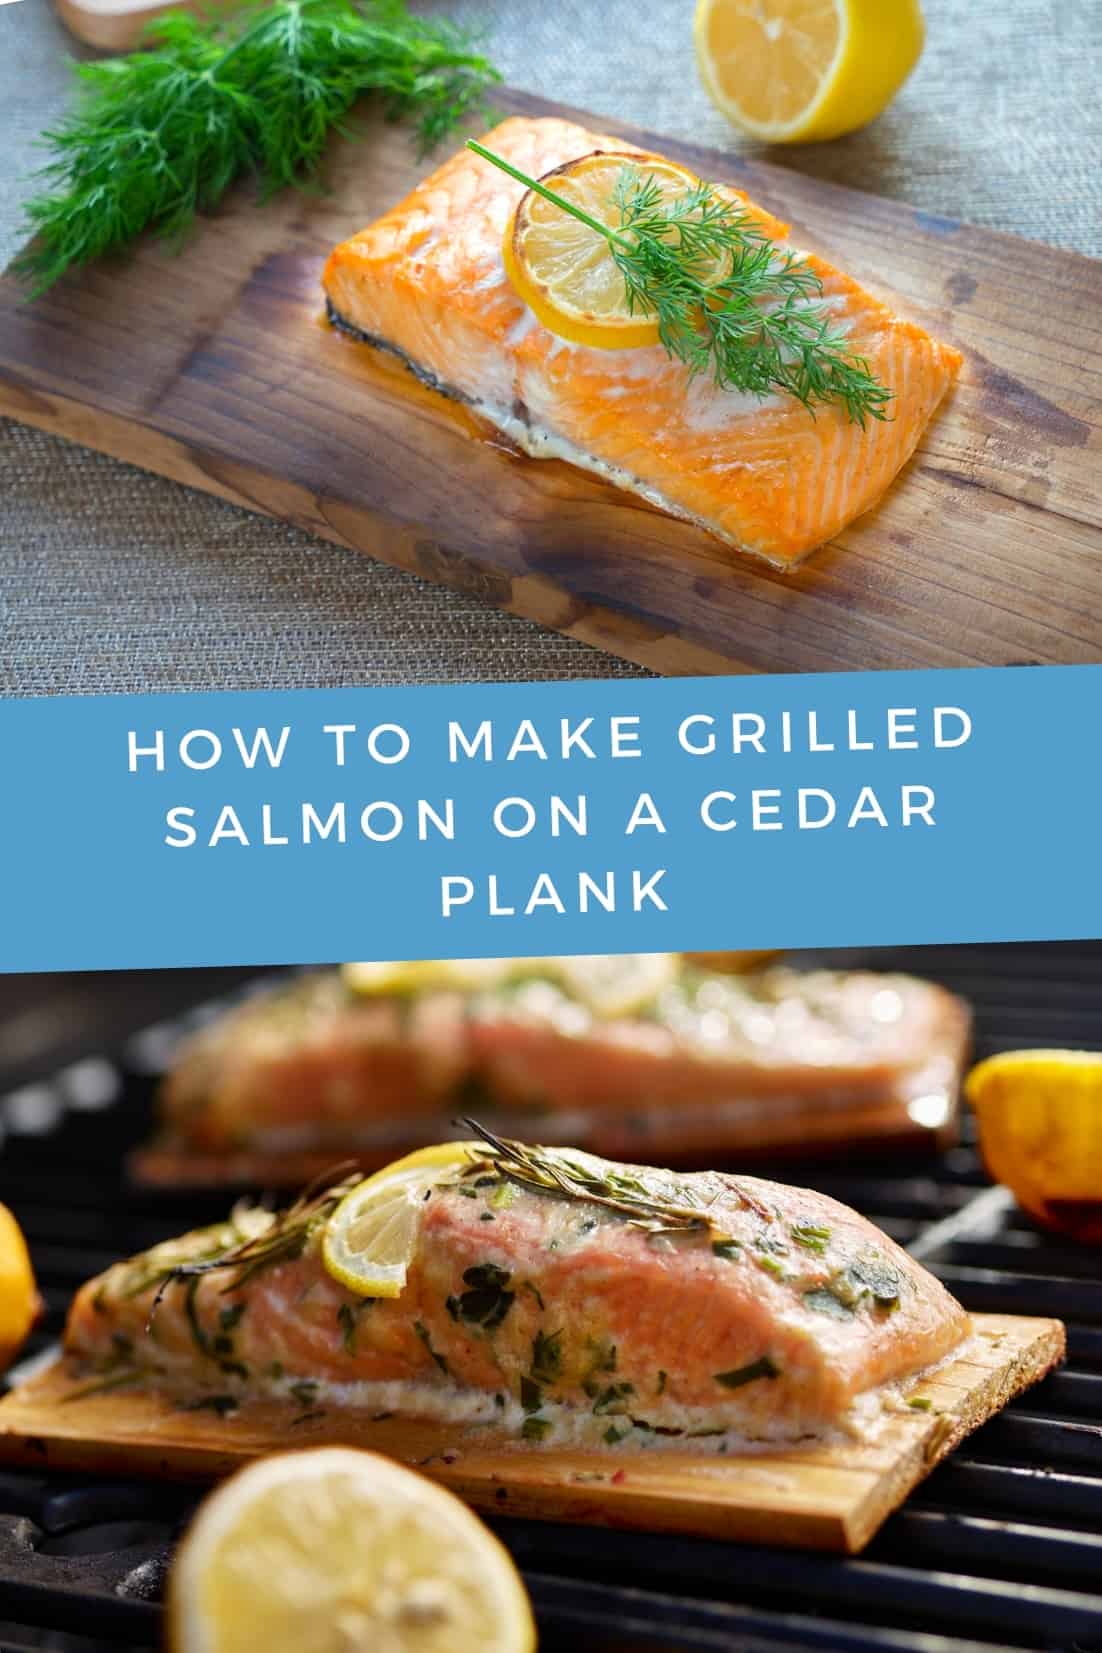 Grilling Salmon on a Cedar Plank | Here's How + Recipes